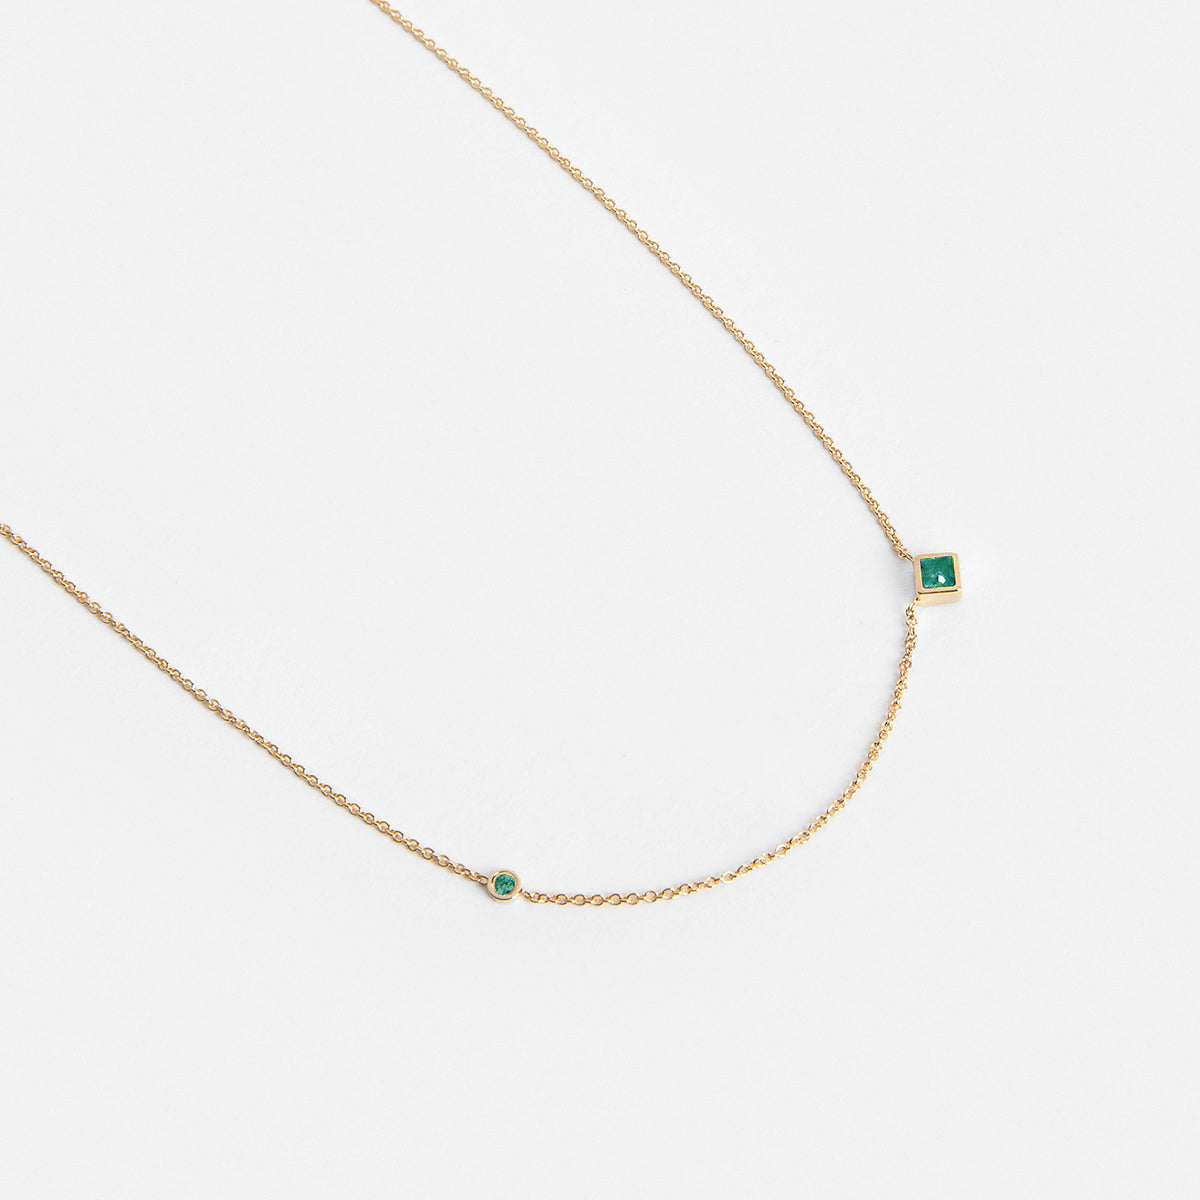 Isu Handmade Necklace in 14k Gold set with Emerald By SHW Fine Jewelry NYC